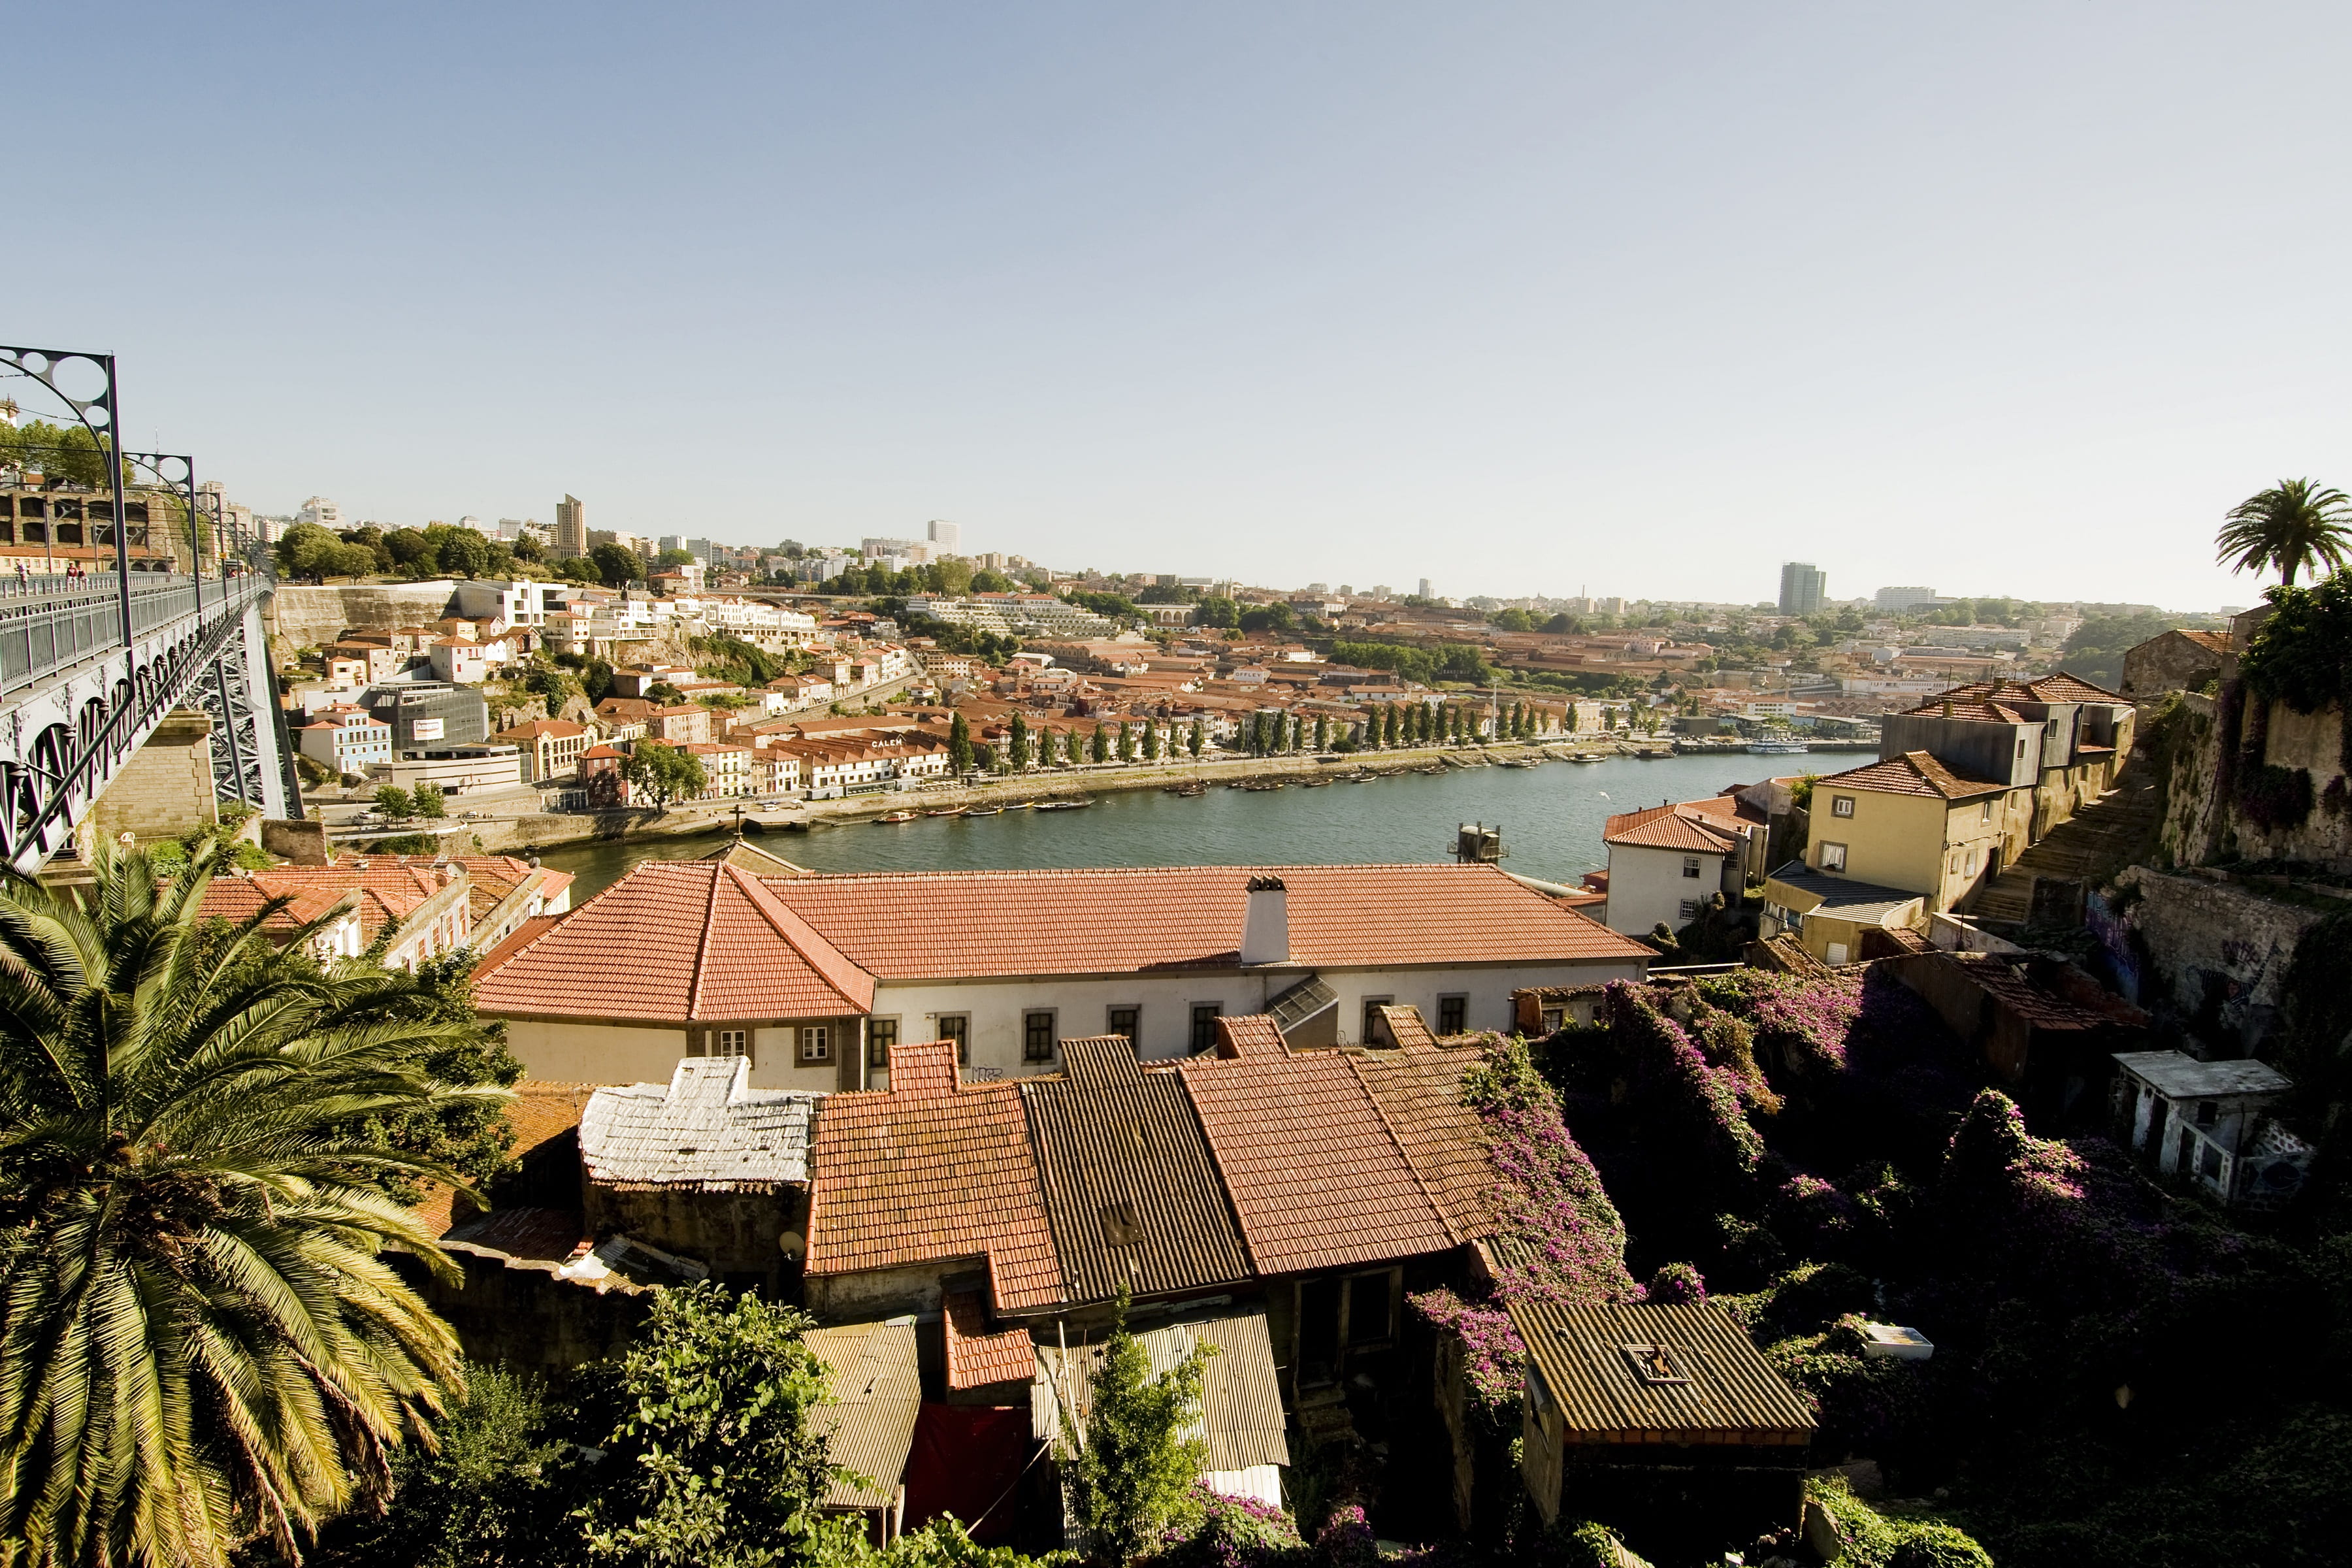 porto, douro, portugal, old town, historically, river, holiday